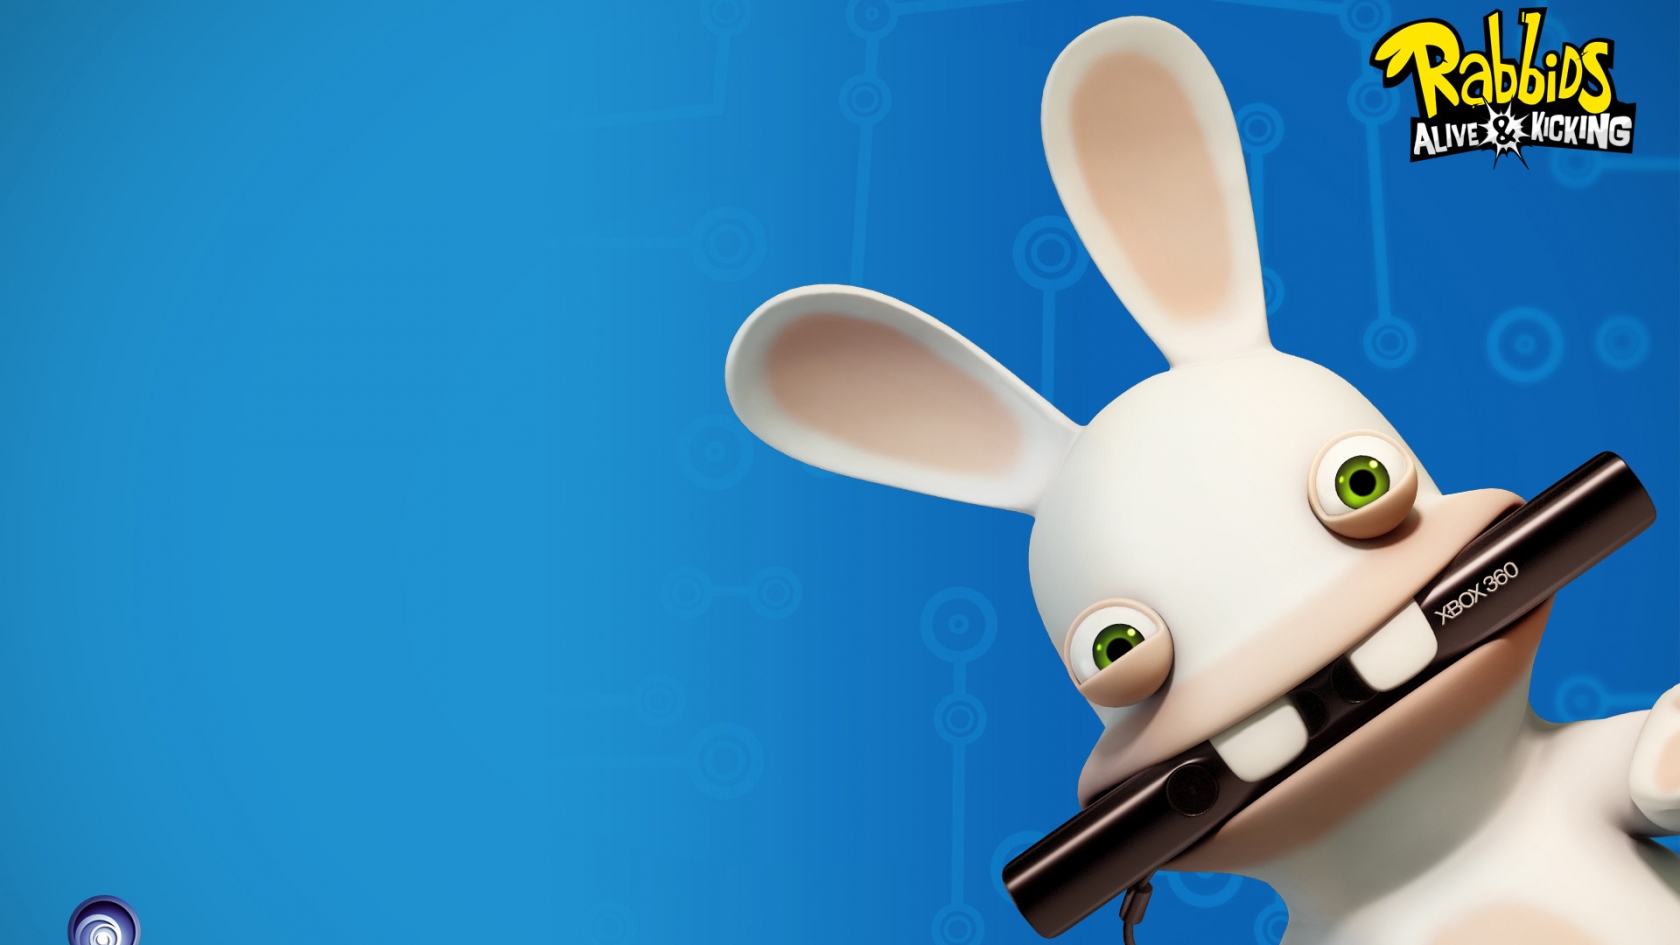 Rabbids Alive and Kicking for 1680 x 945 HDTV resolution